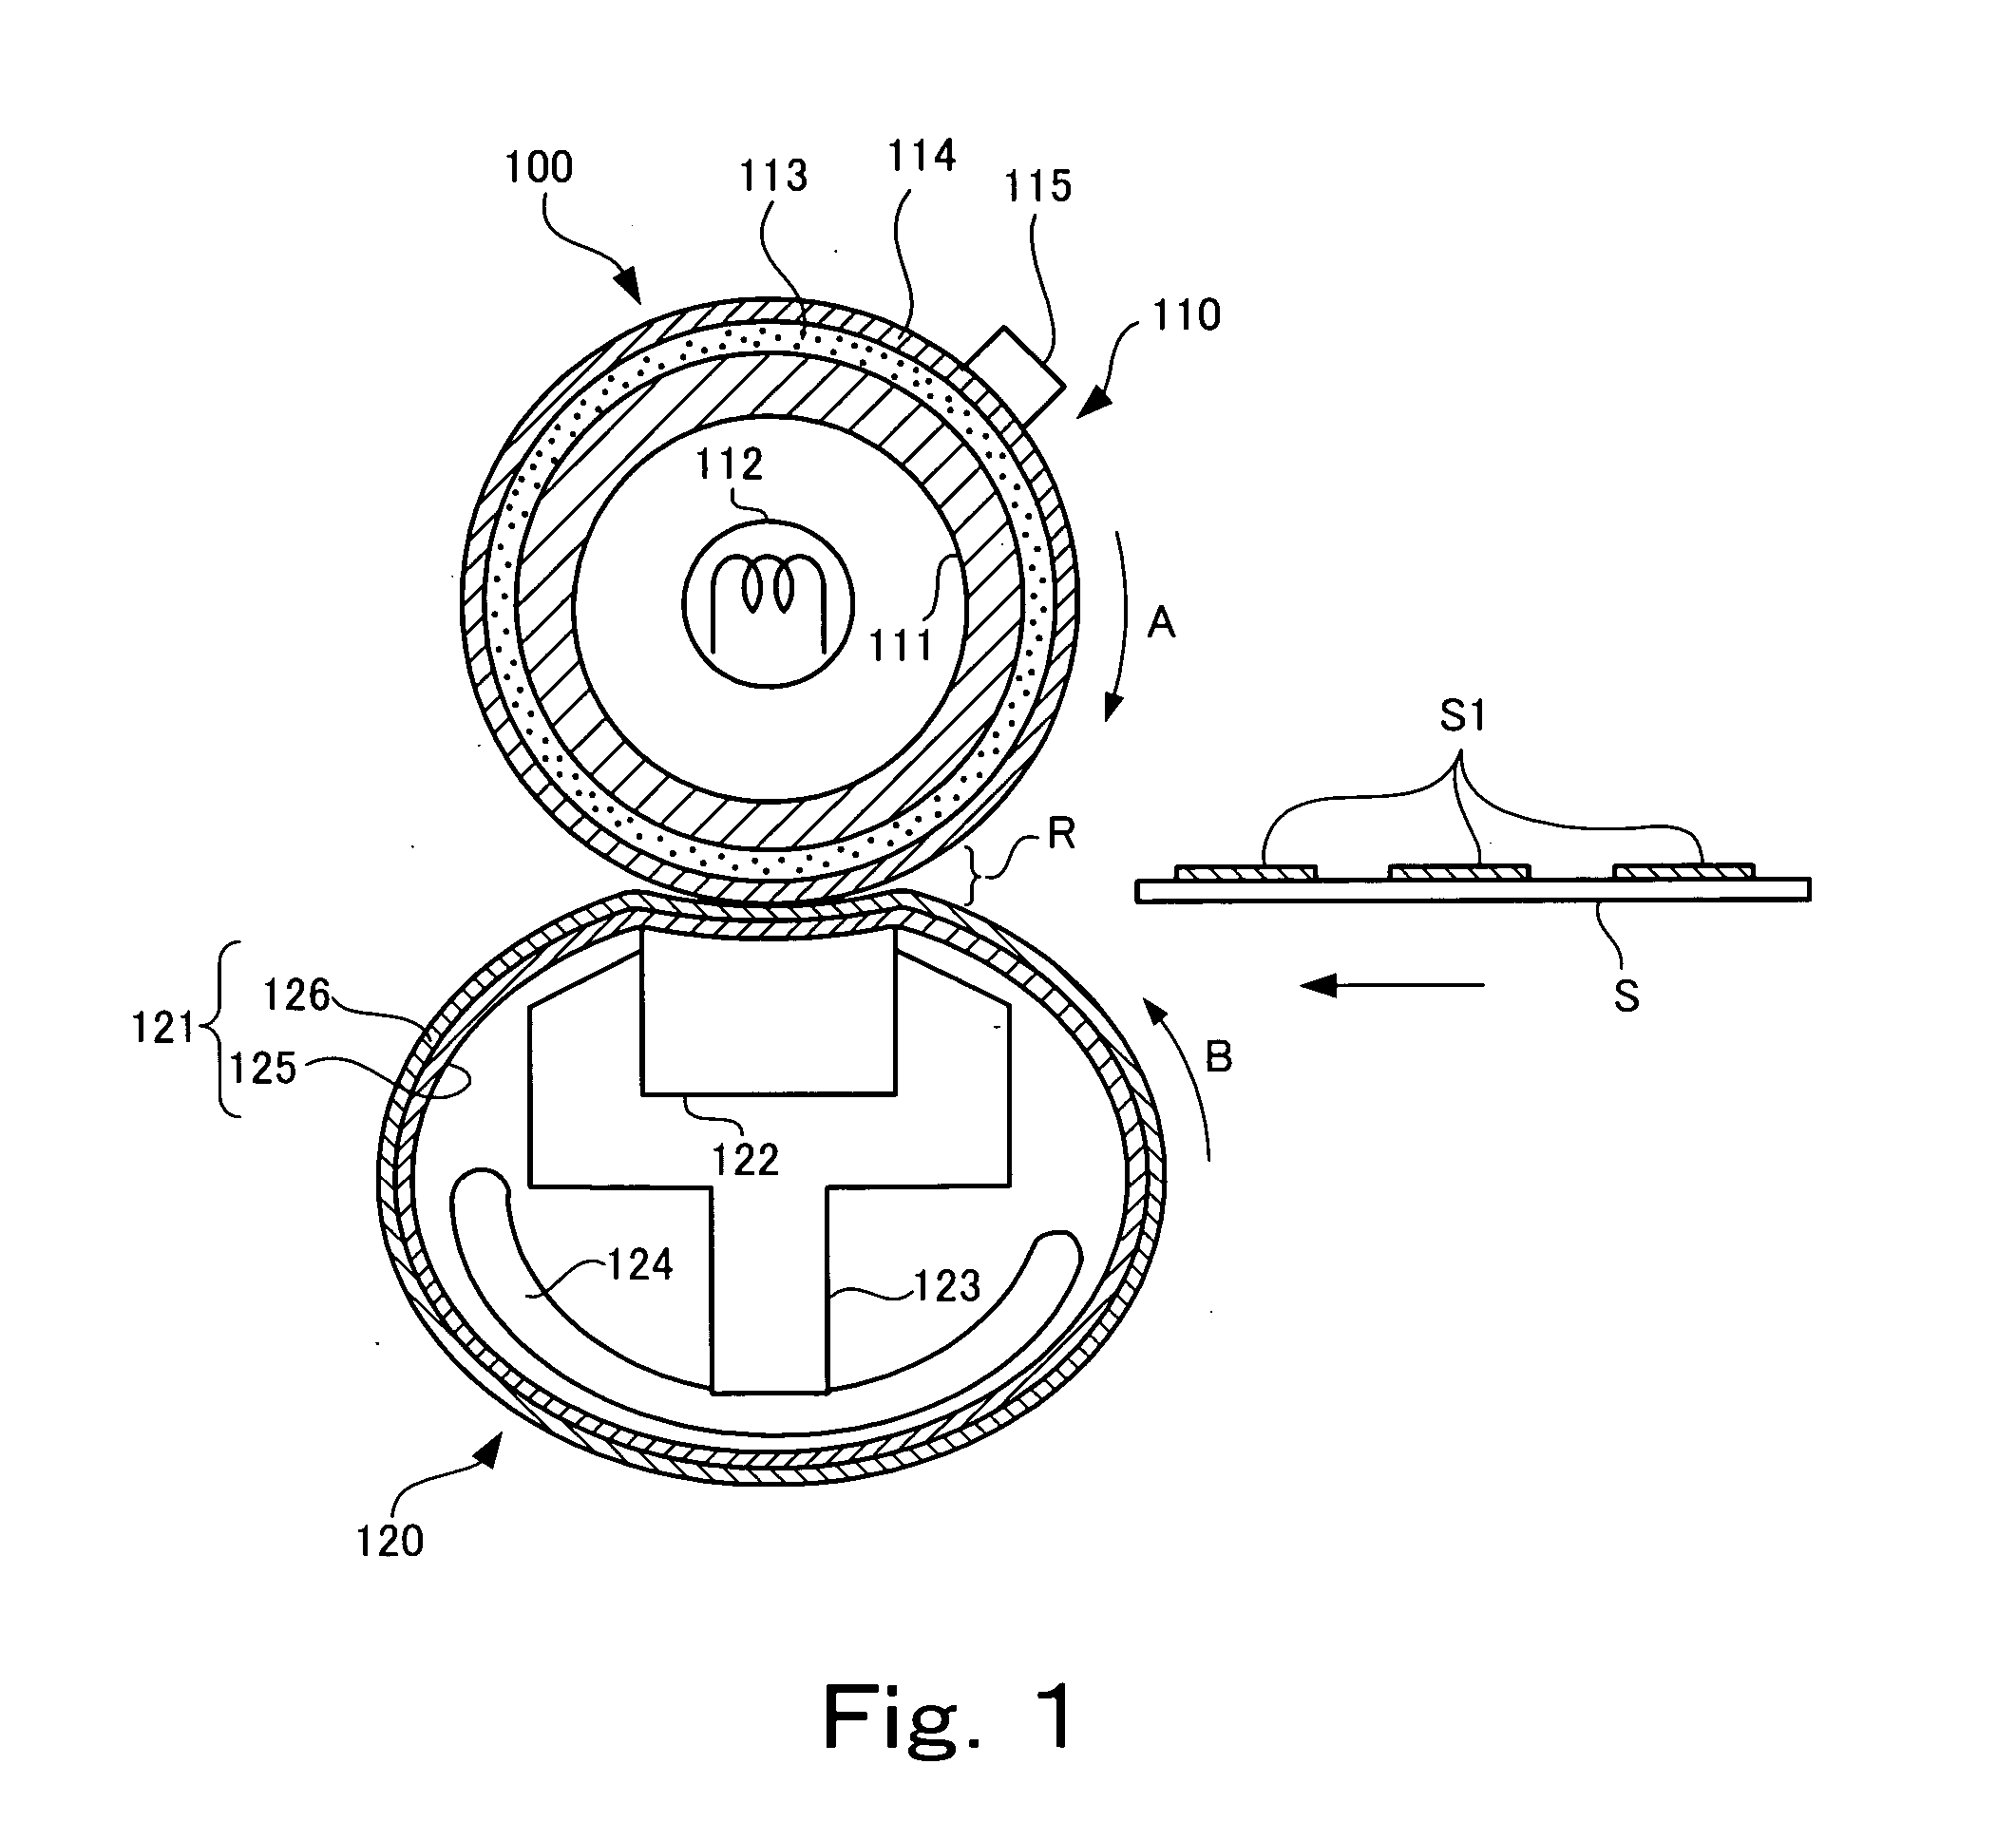 Circulating body and fixing device